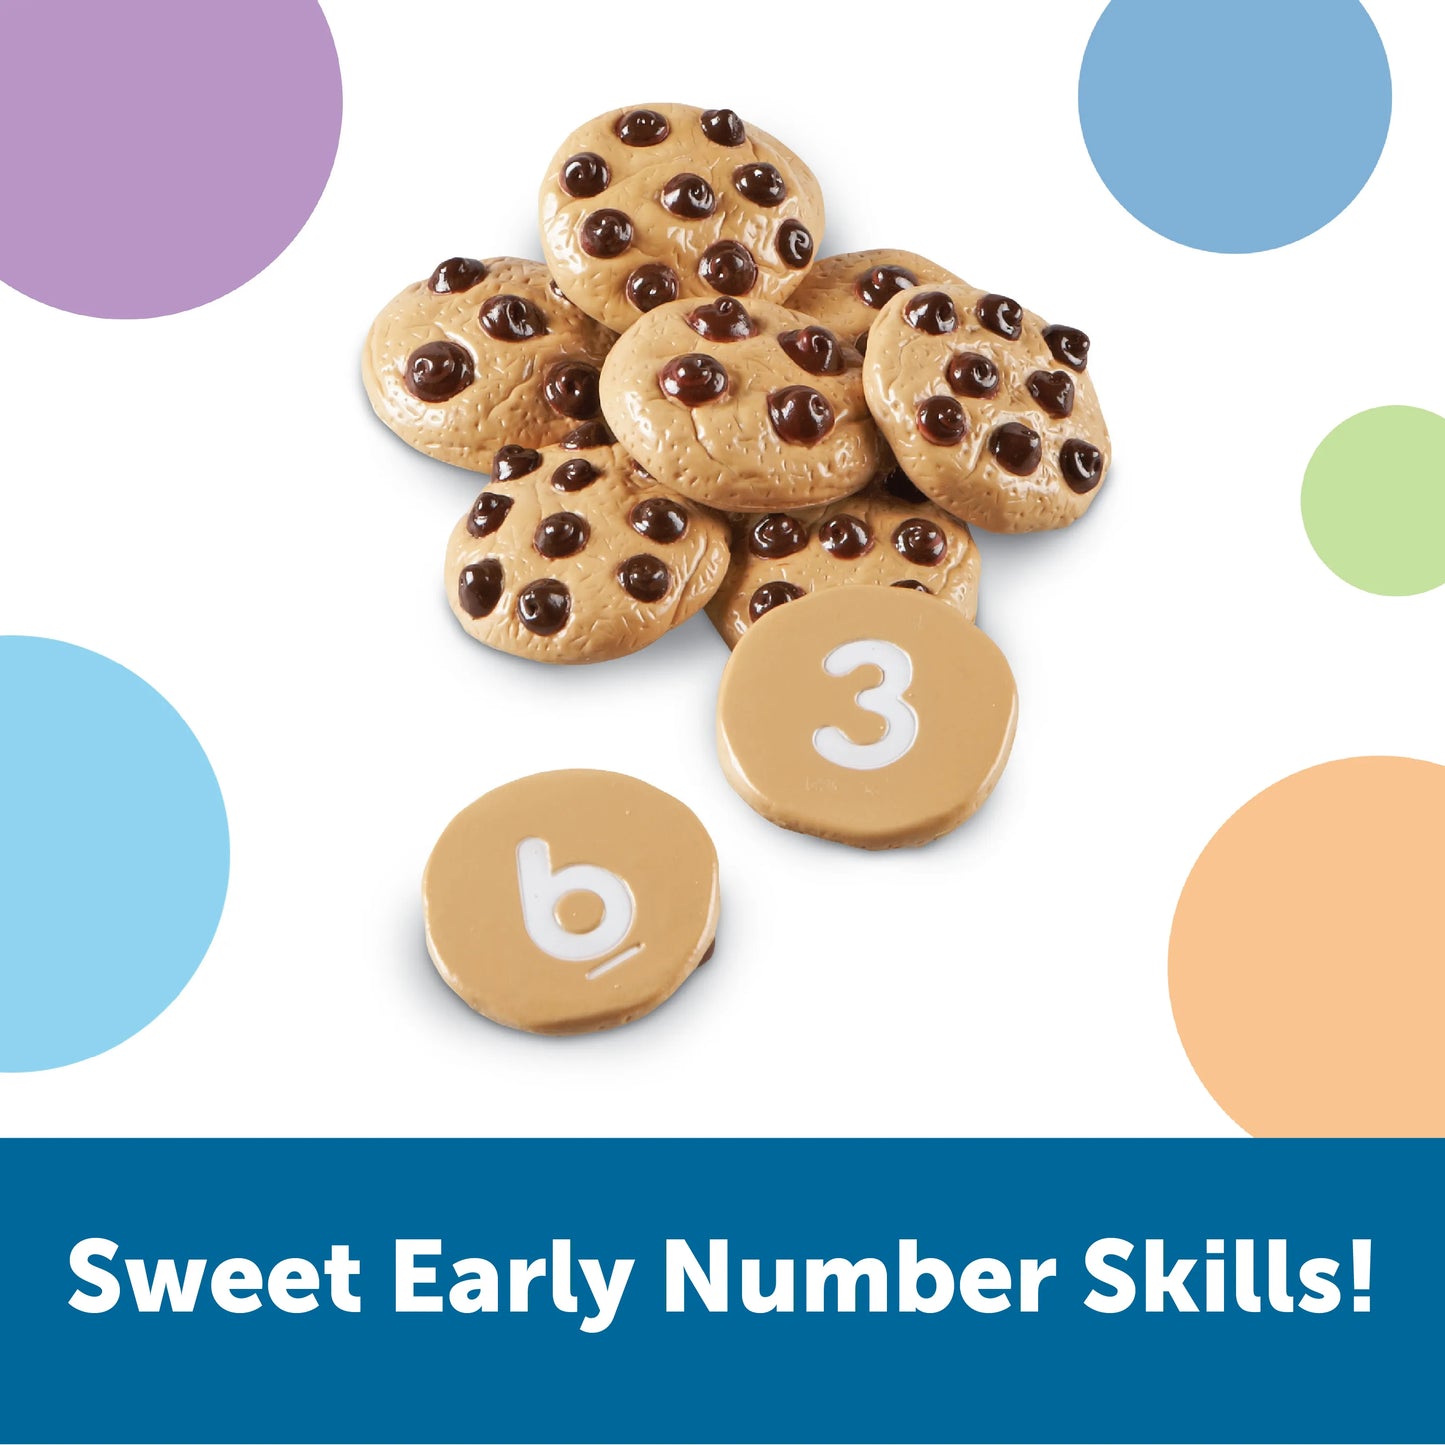 Learning Resources Smart Snacks Counting Cookies